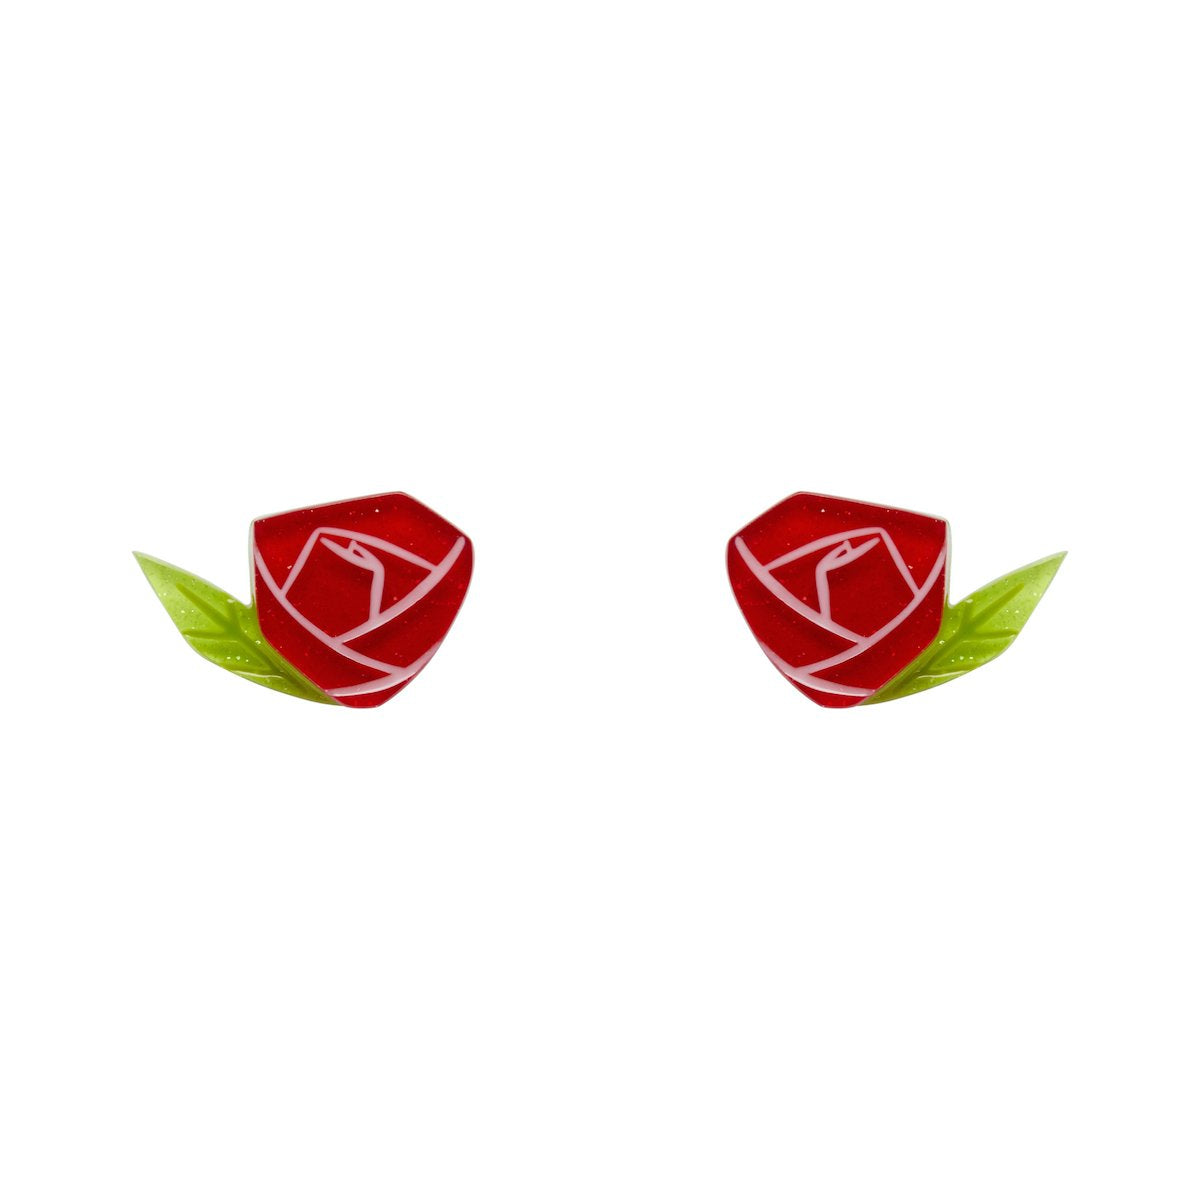 pair red rose with green leaf layered resin post earrings